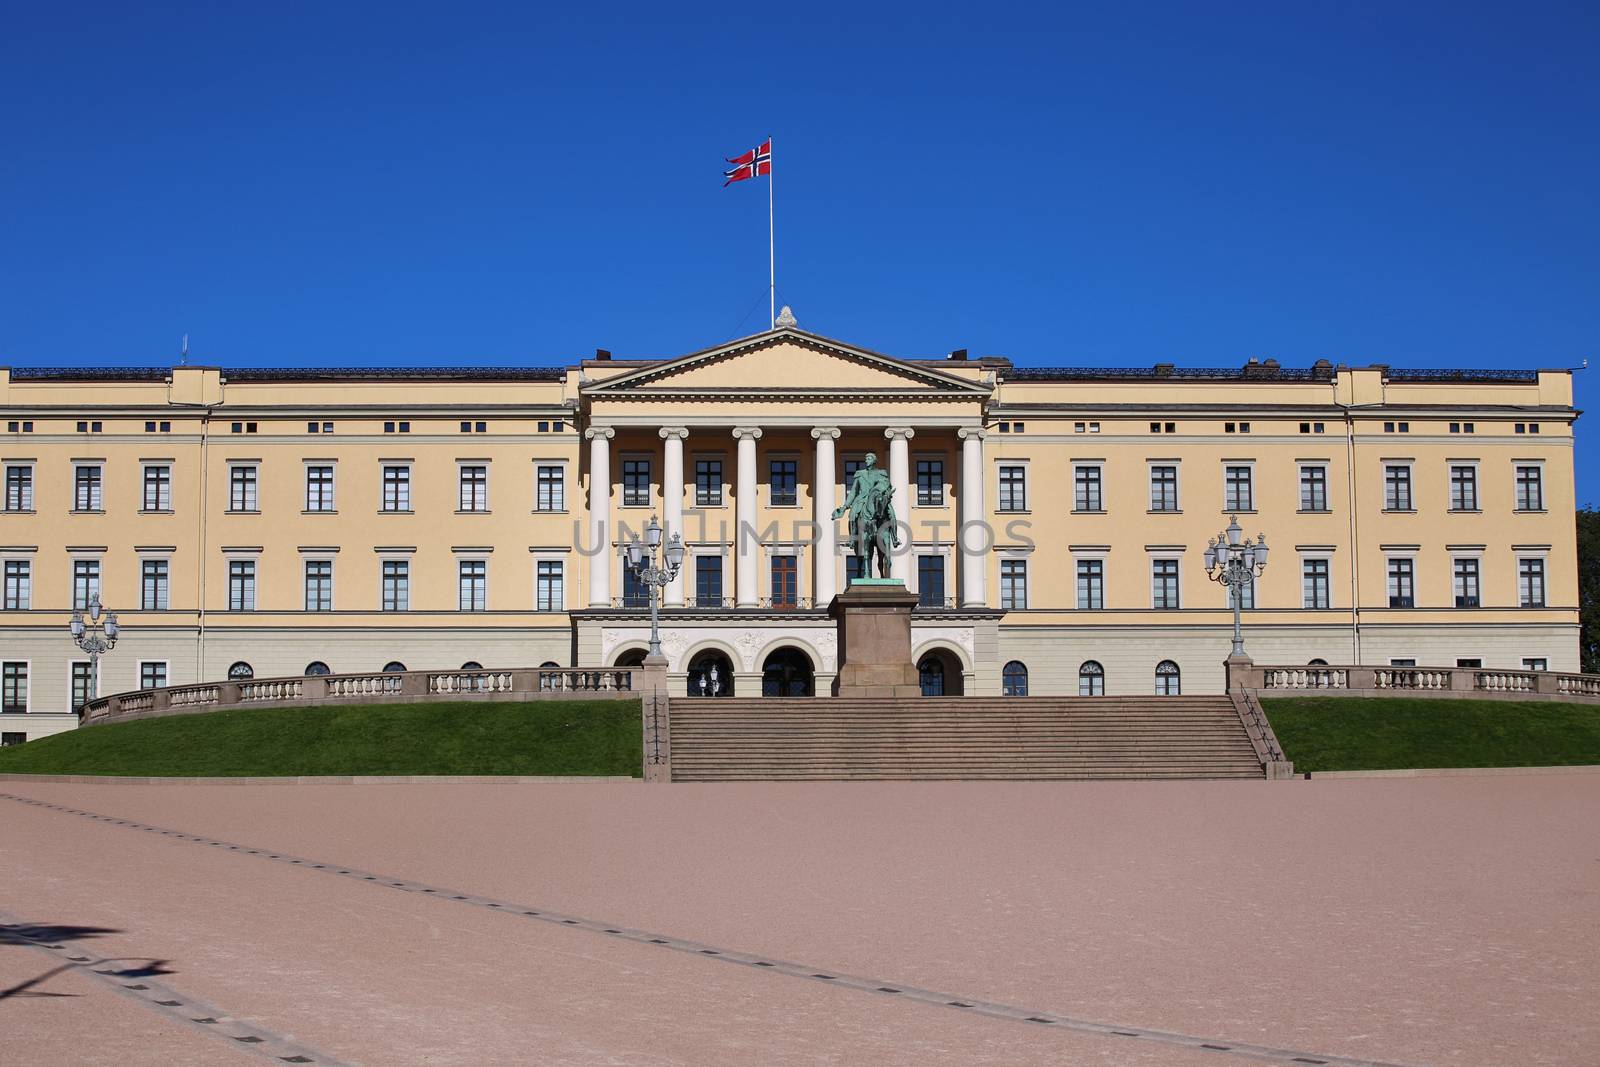 The Royal Palace and statue of King Karl Johan XIV in Oslo, Norw by vladacanon